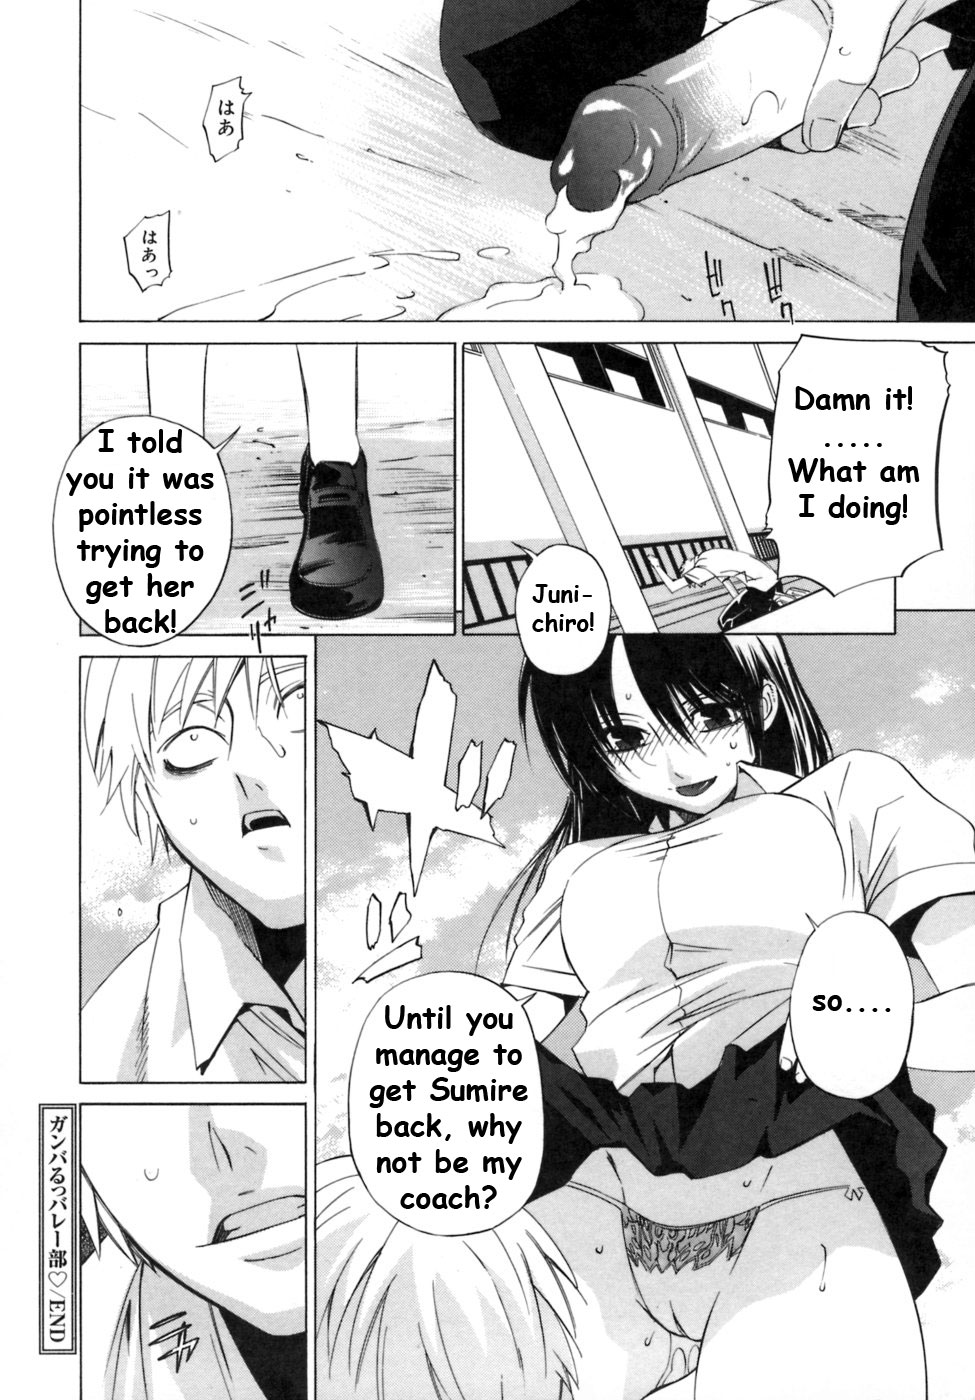 [Ootsuka Kotora] Kanojo no honne. - Her True Colors [English] [Filthy-H + CiRE's Mangas + Sling] page 46 full